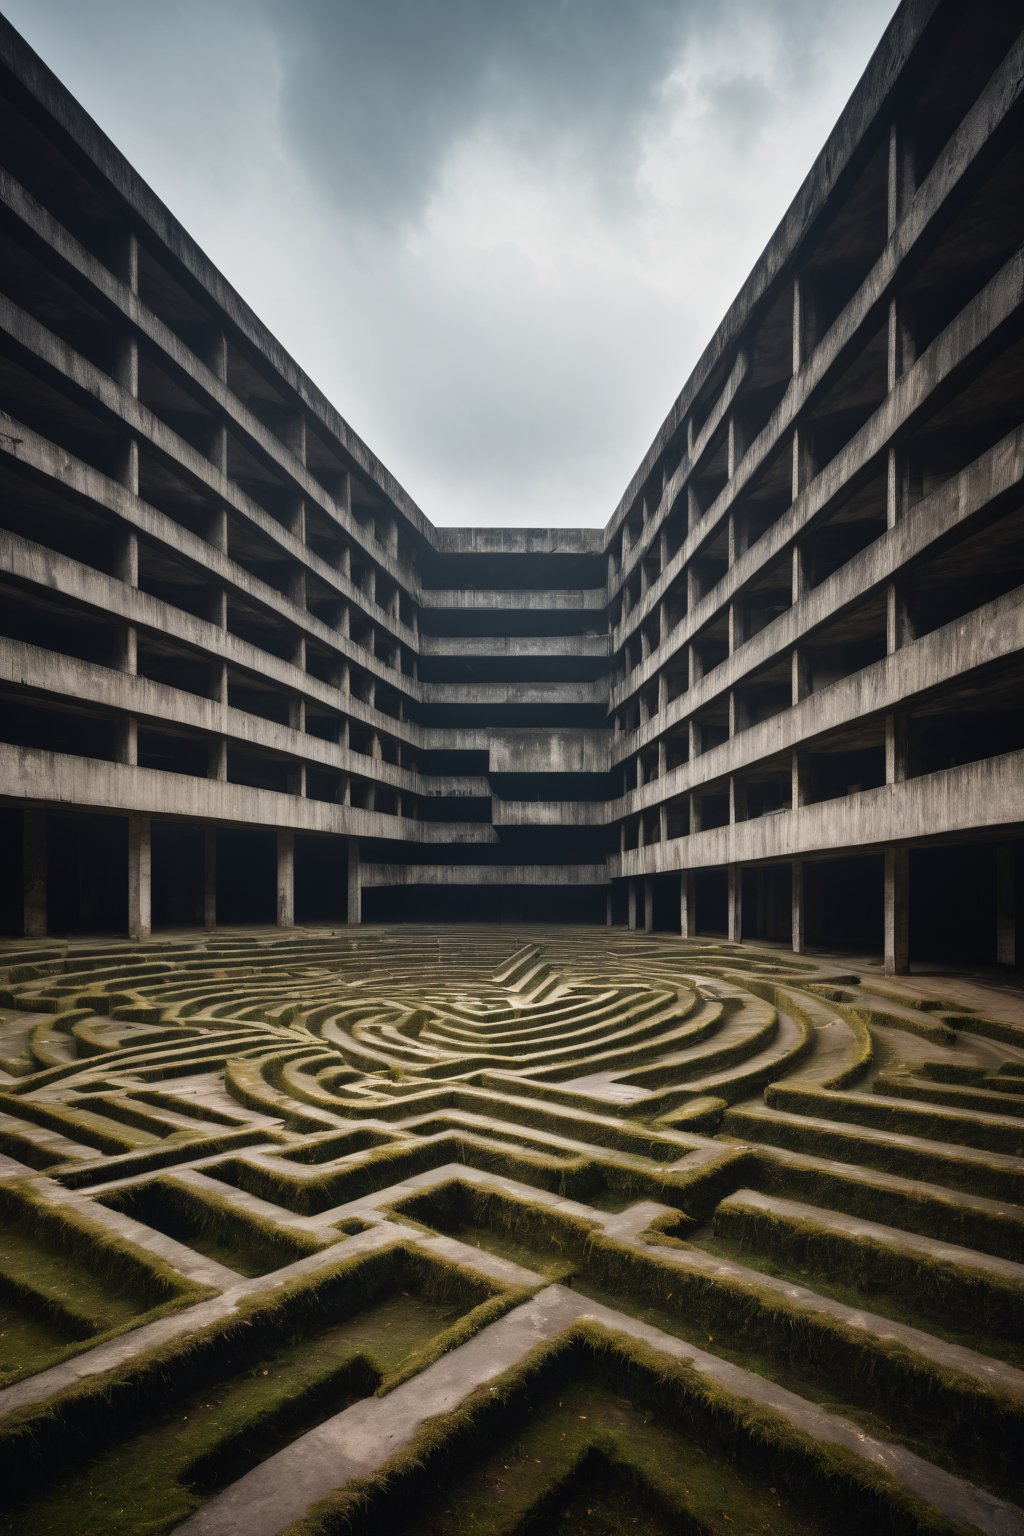 Brutalism Building with labyrinth-like starcaes and ramps in desolated environment, veery gloomy atmosphere 